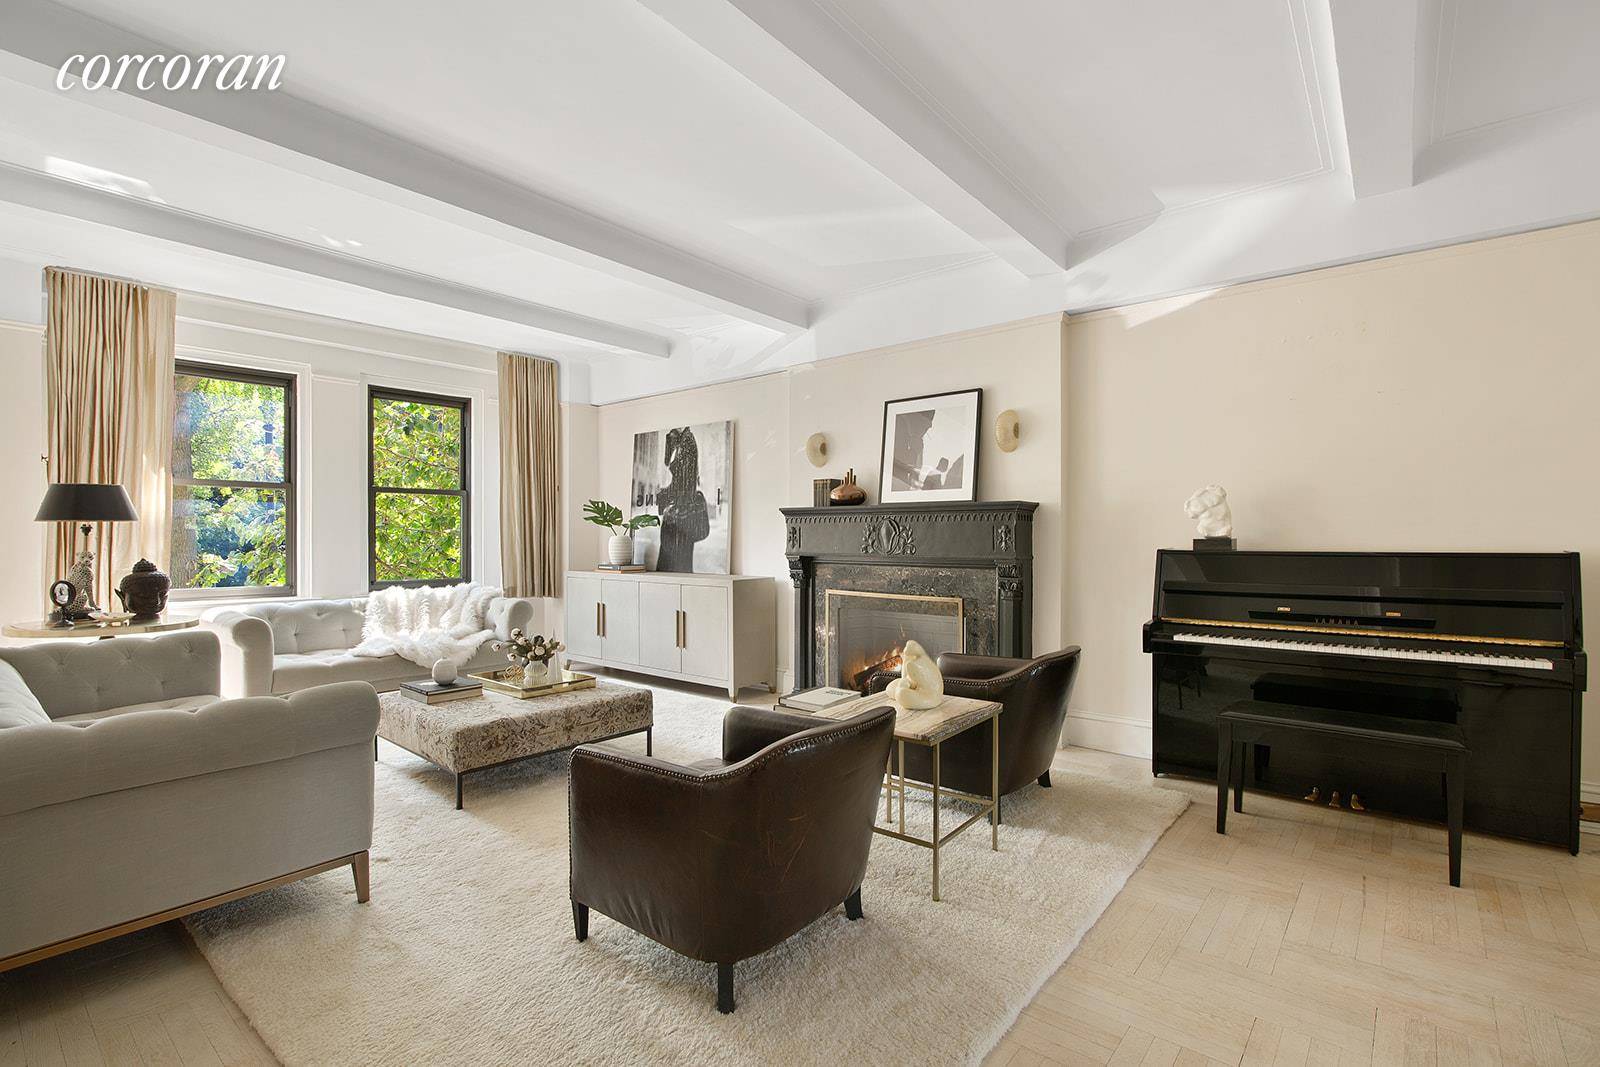 Sprawling Park Slope prewar apartment with stunning modern upgrades and finishes, impeccably designed and built to entertain.